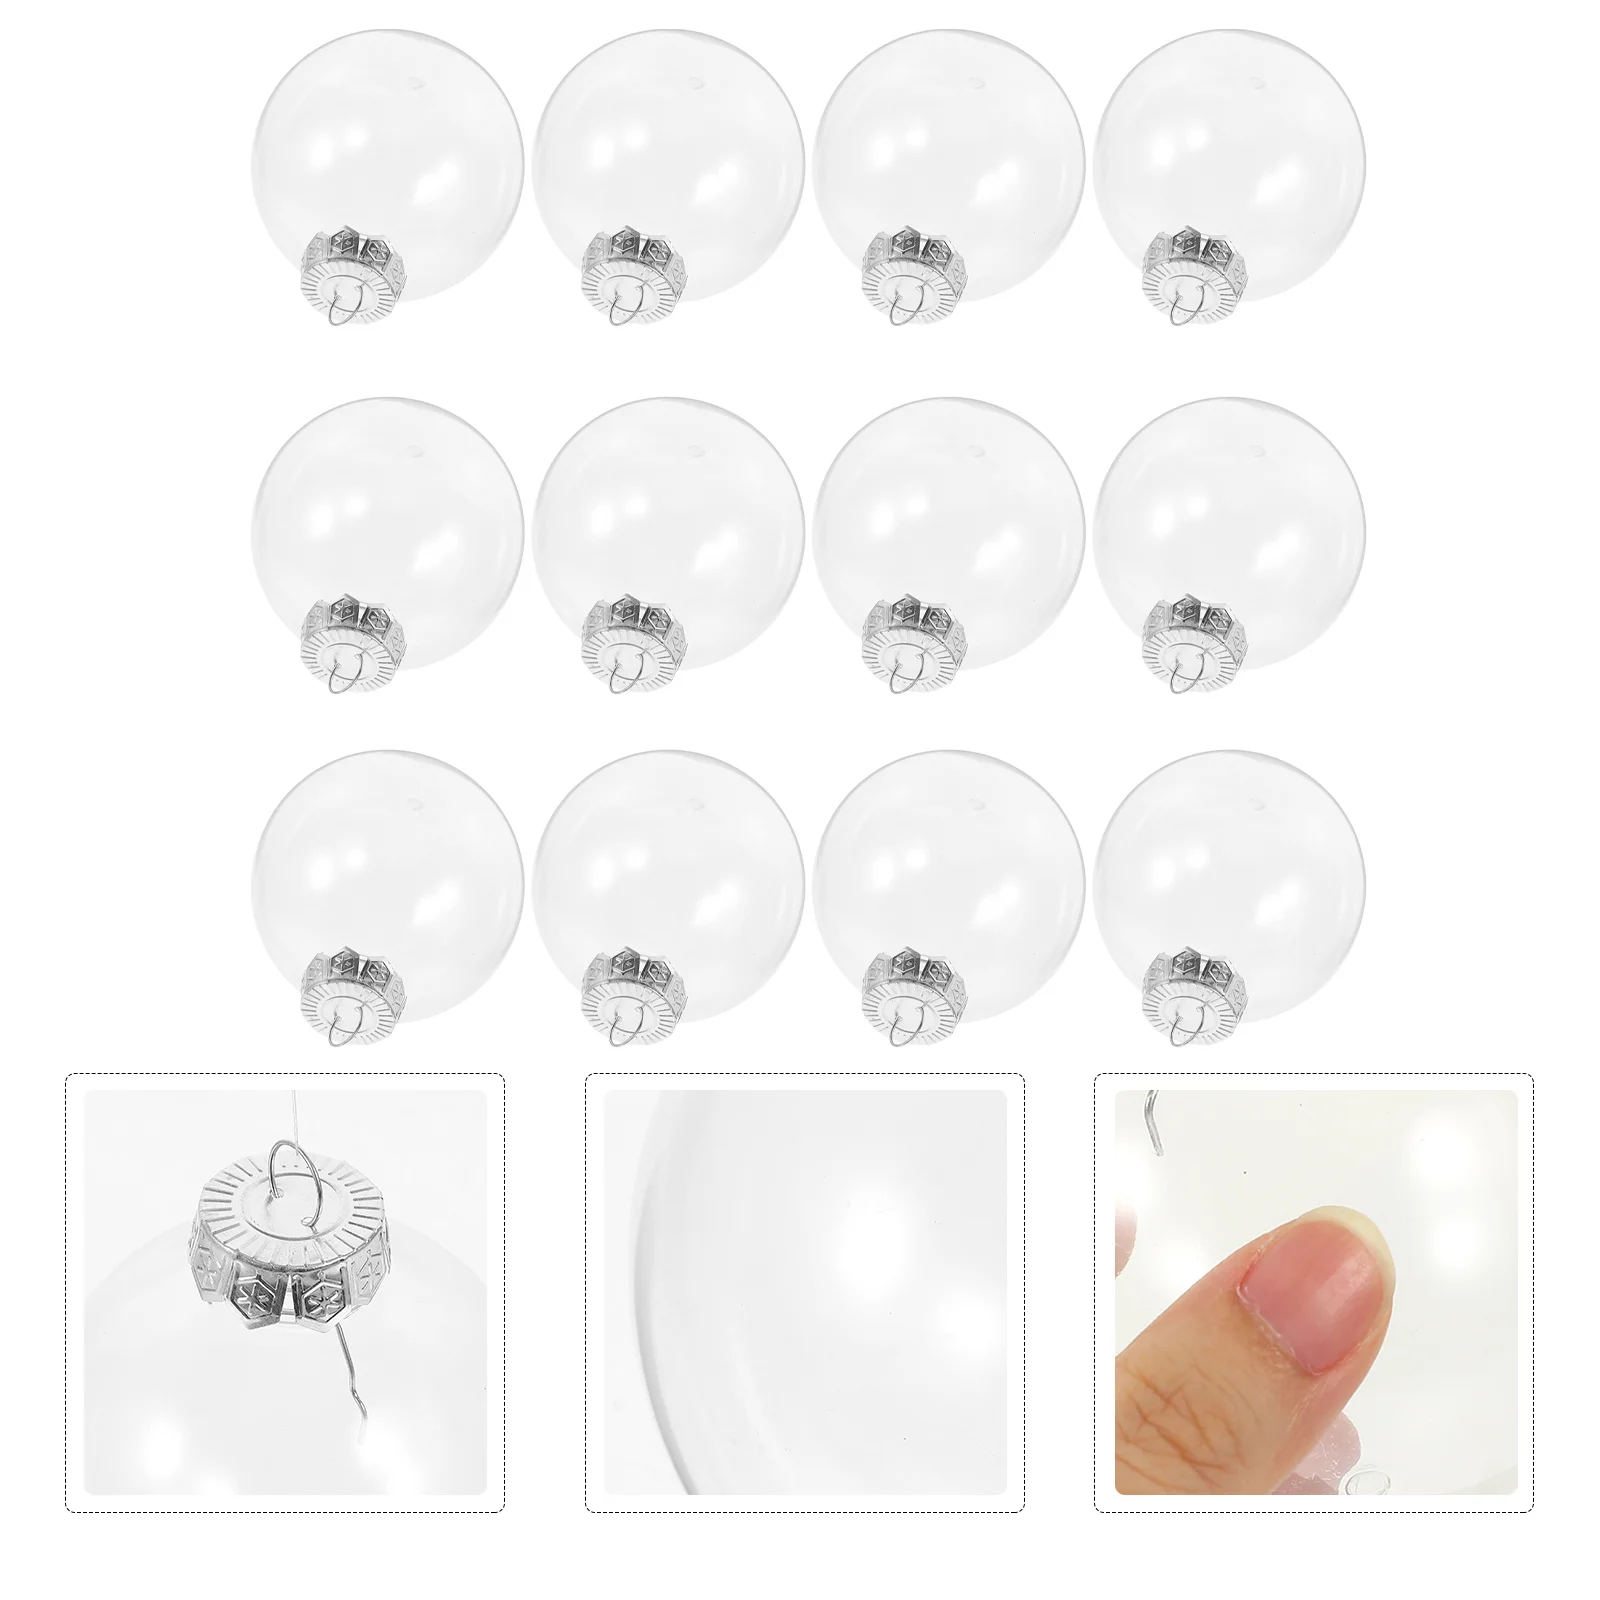 

12 Pcs Plastic Containers Transparent Ball Capsules Empty Ornaments Crafts Fillable Clear Balls Party